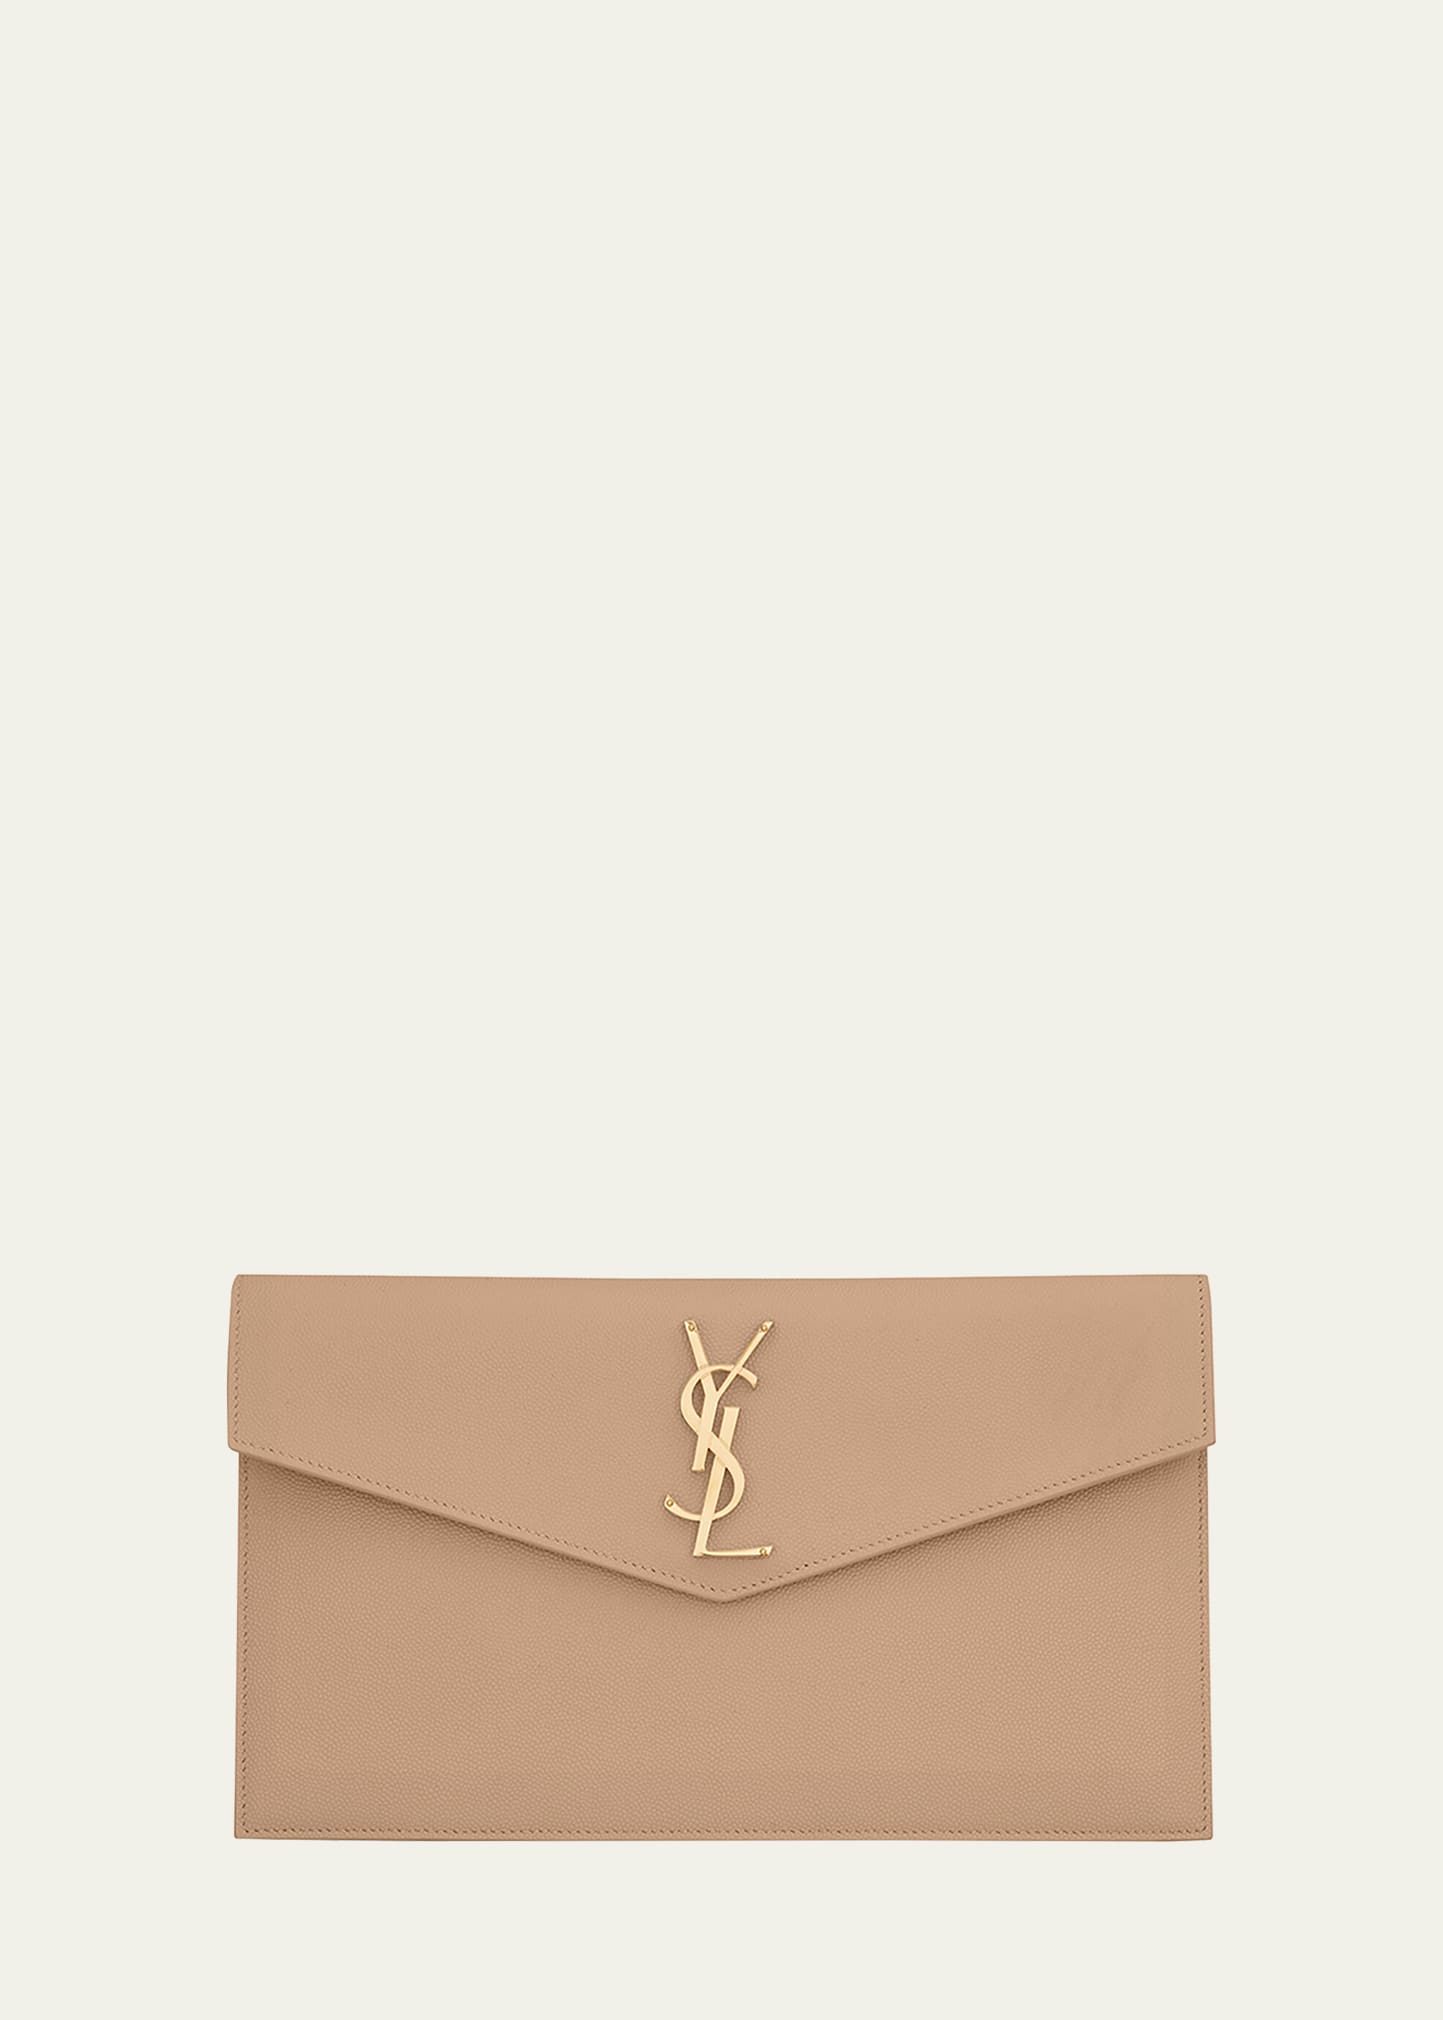 Saint Laurent Uptown YSL Pouch in Grained Leather | Bergdorf Goodman